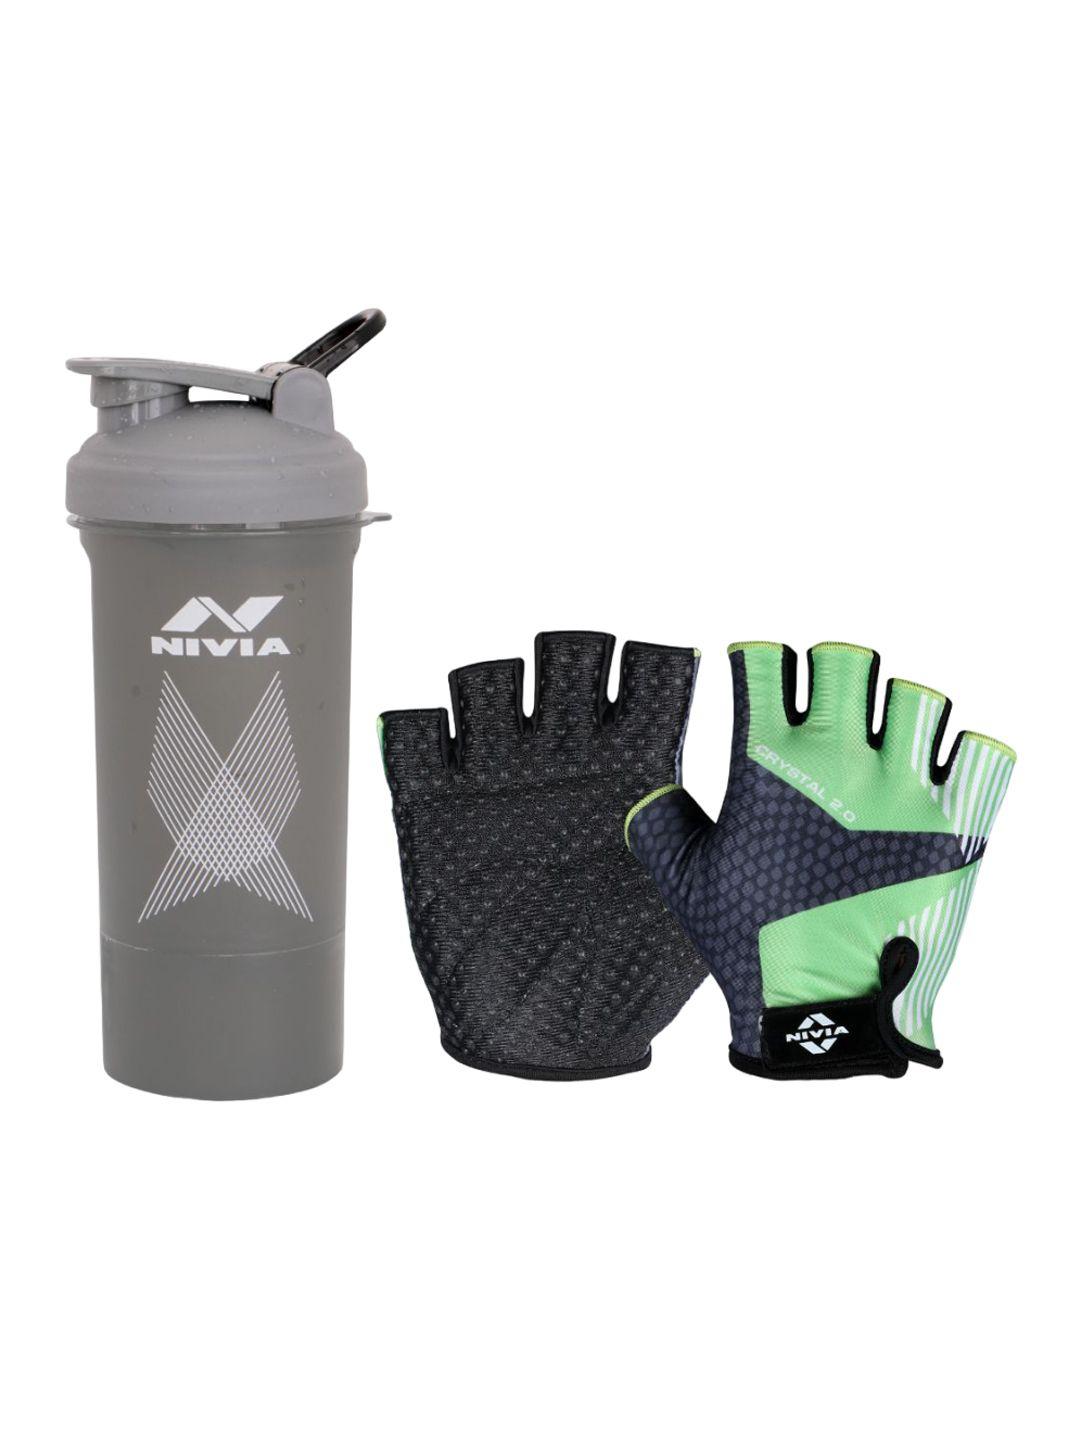 nivia-textured-leather-gym-gloves-with-shaker